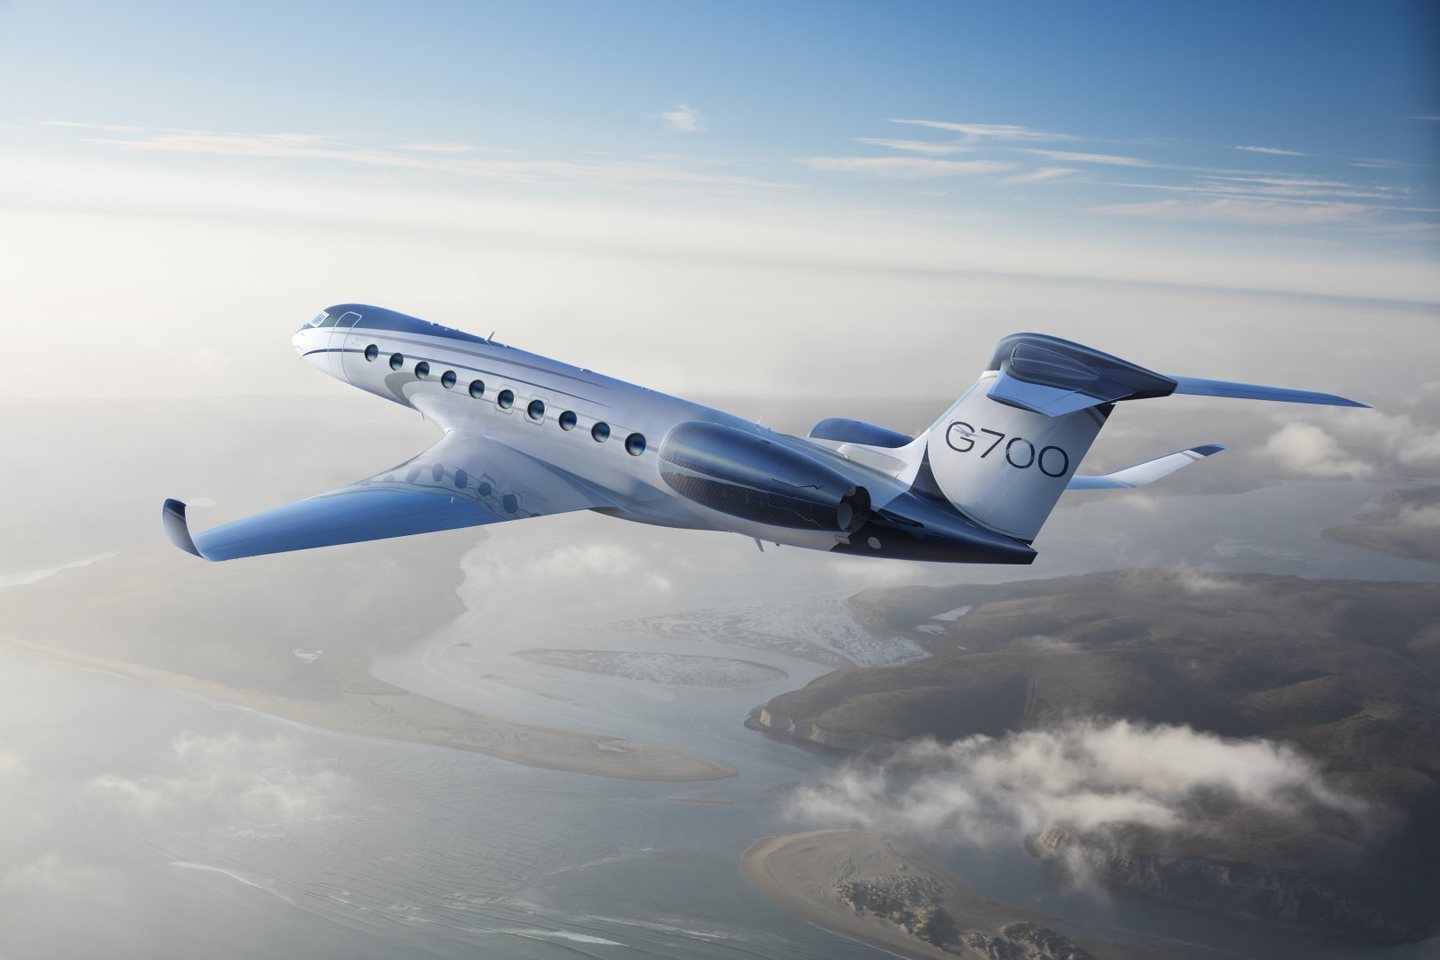 360 VR Virtual Tours of the Gulfstream G700